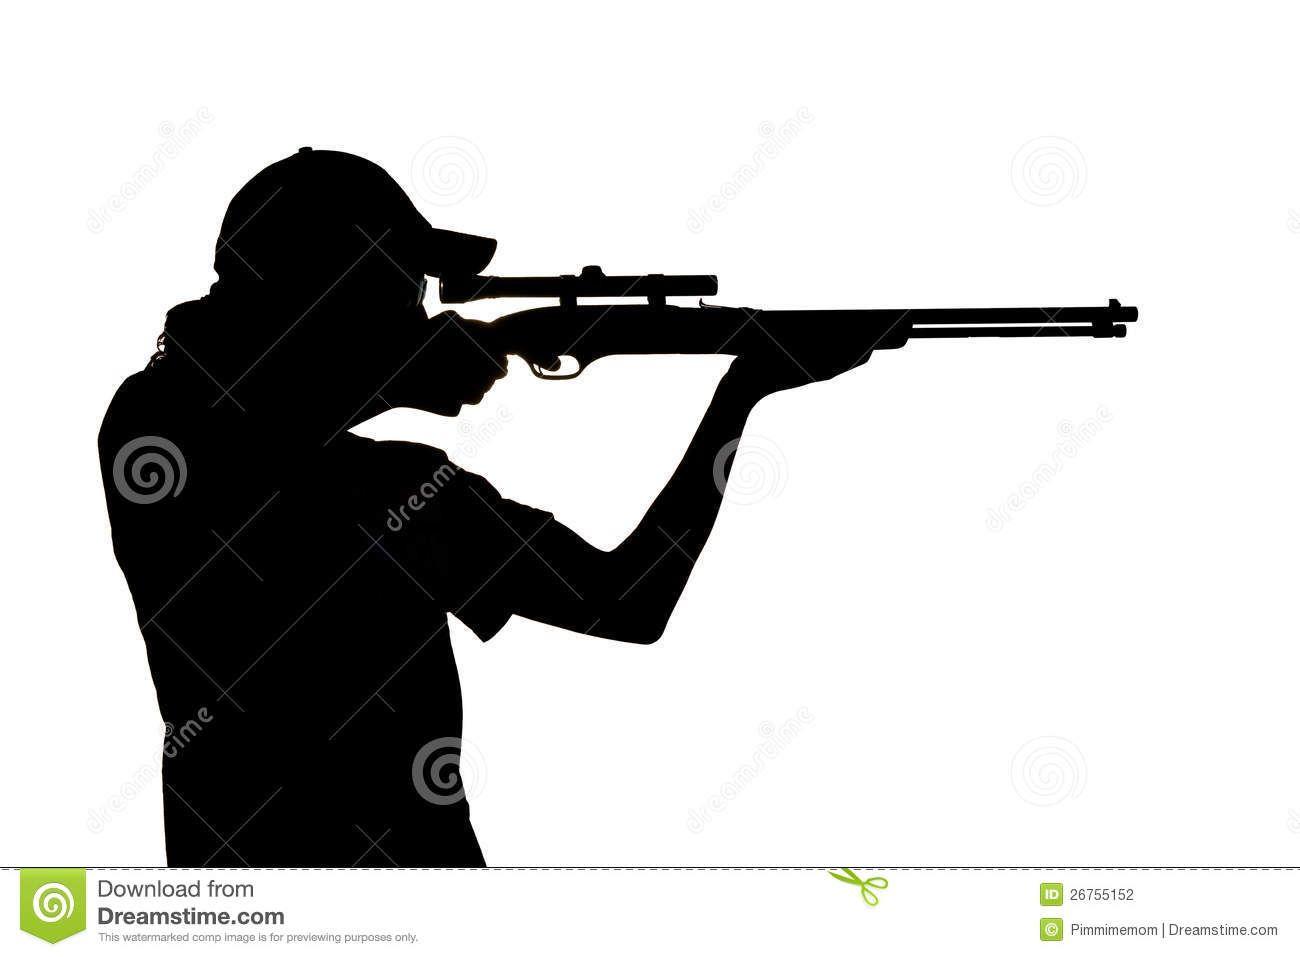 Rifle Shooting Logo - Vector air rifle image royalty free library logo - RR collections